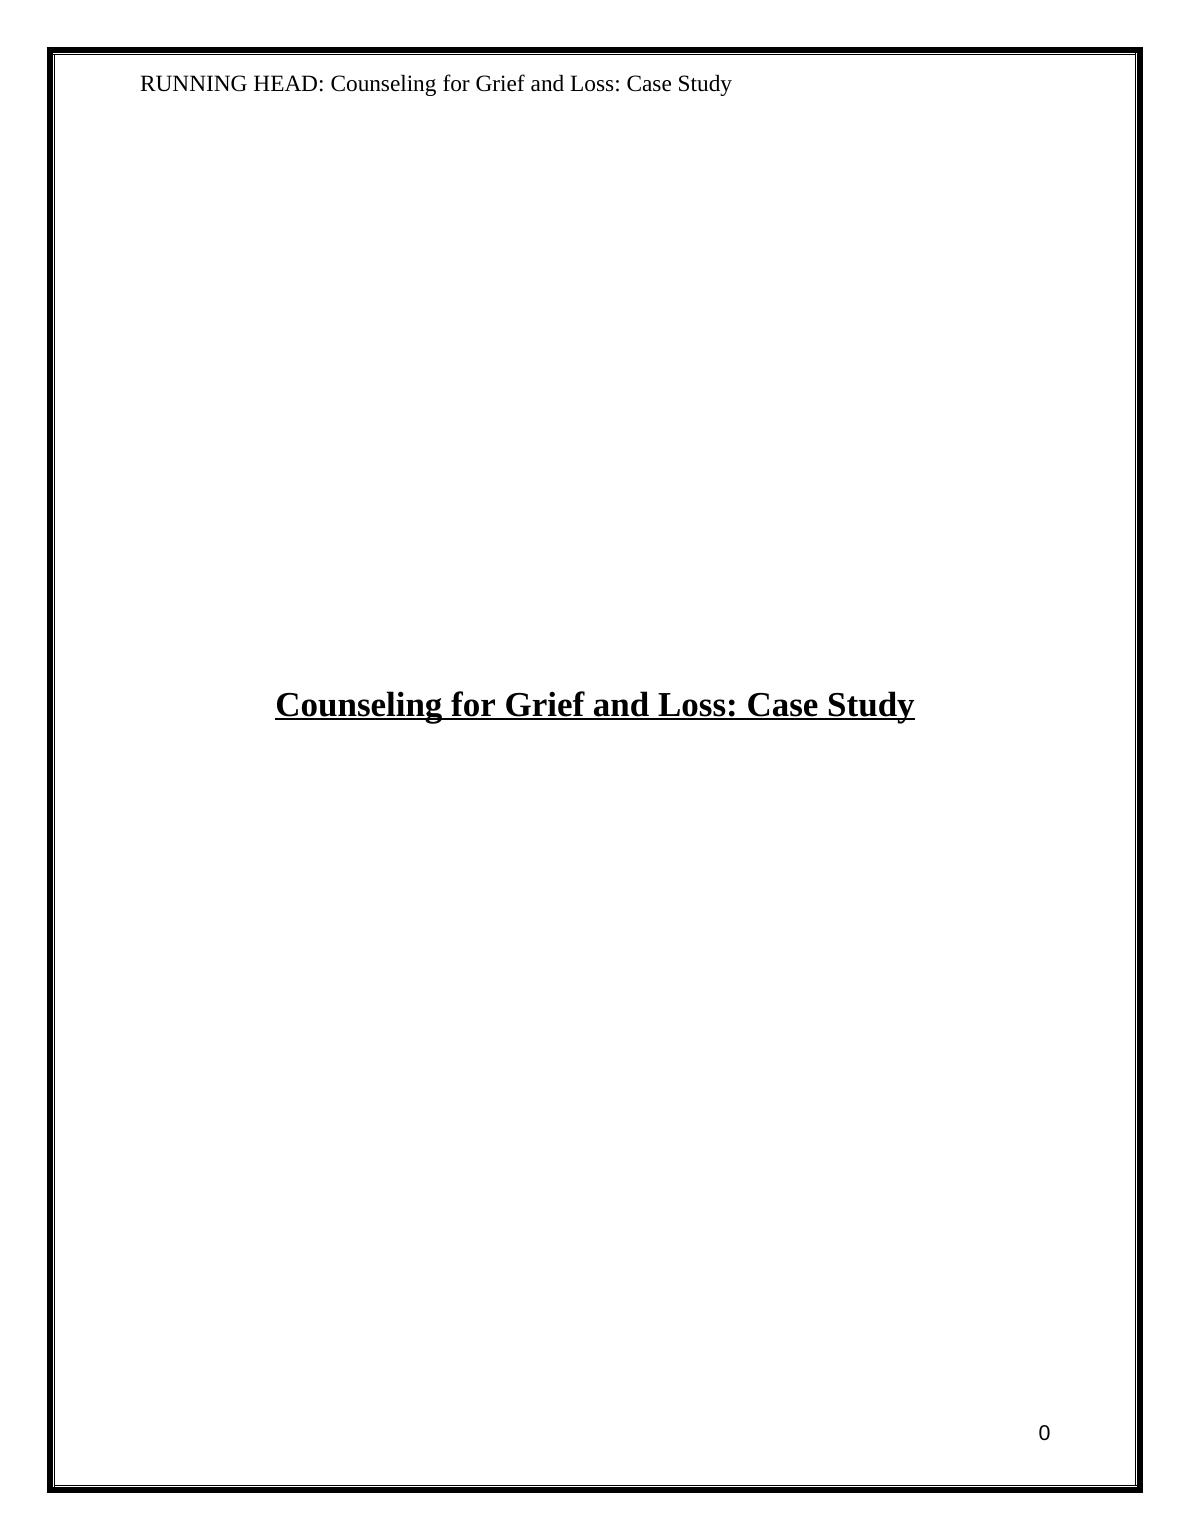 Counseling for Grief and Loss | Case Study_1